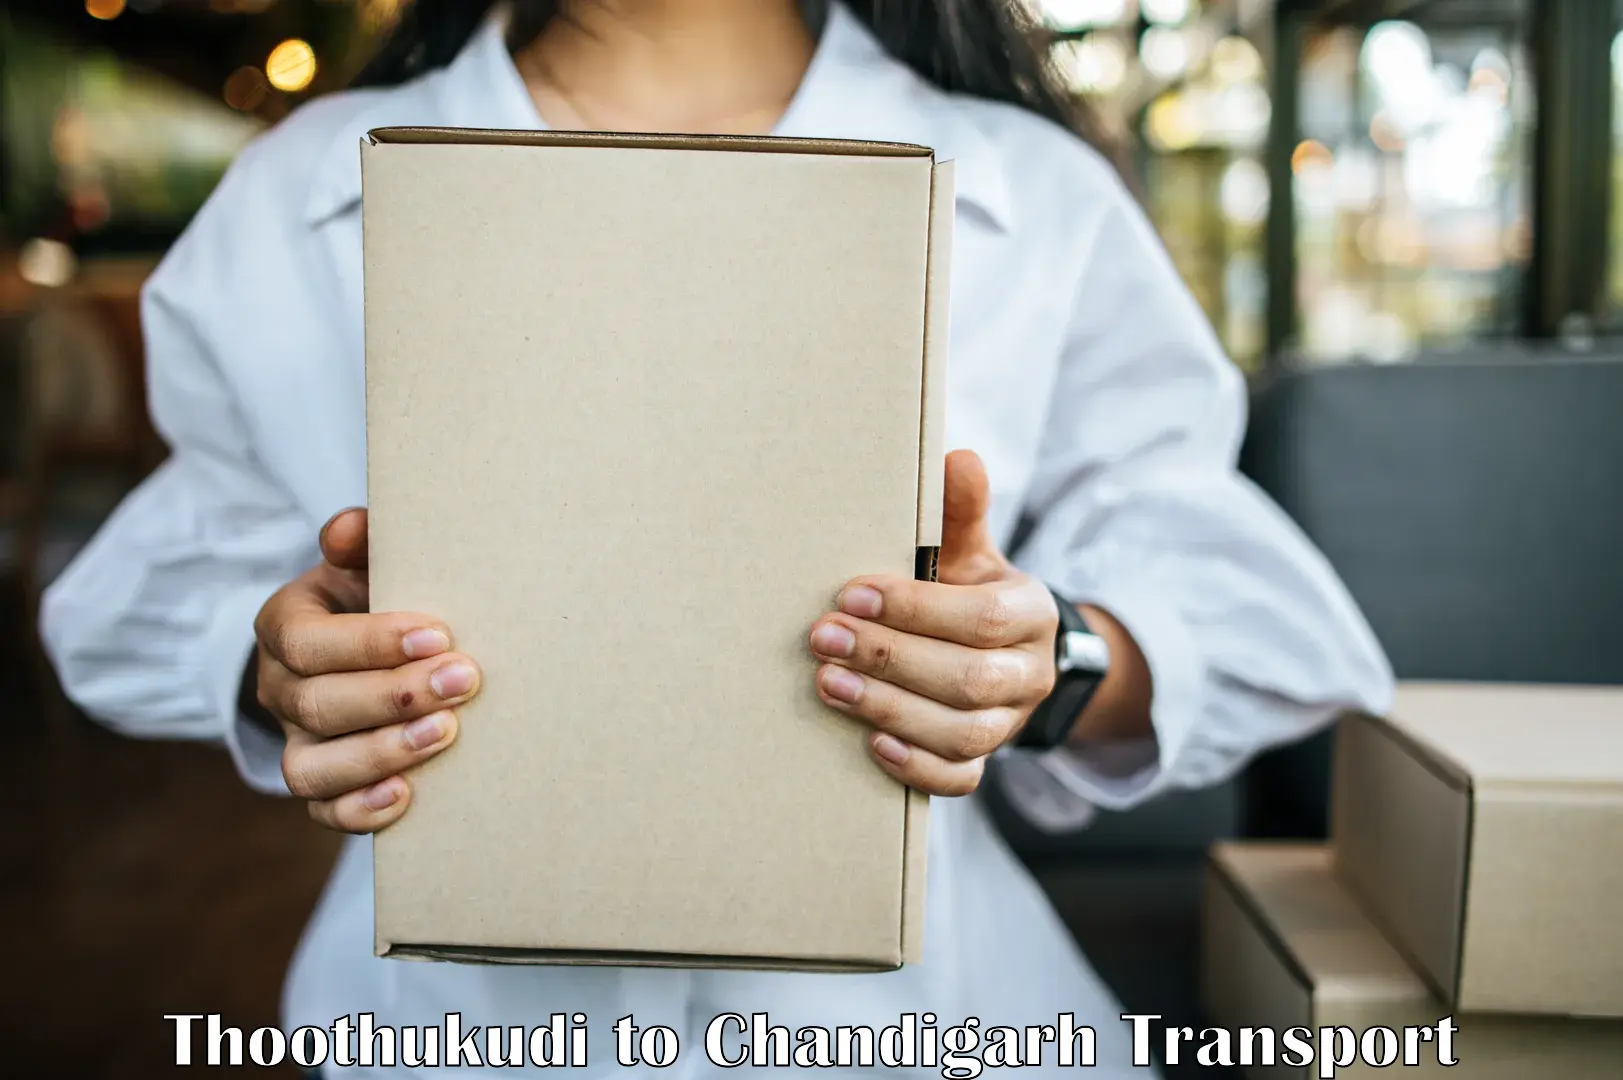 Goods delivery service Thoothukudi to Chandigarh